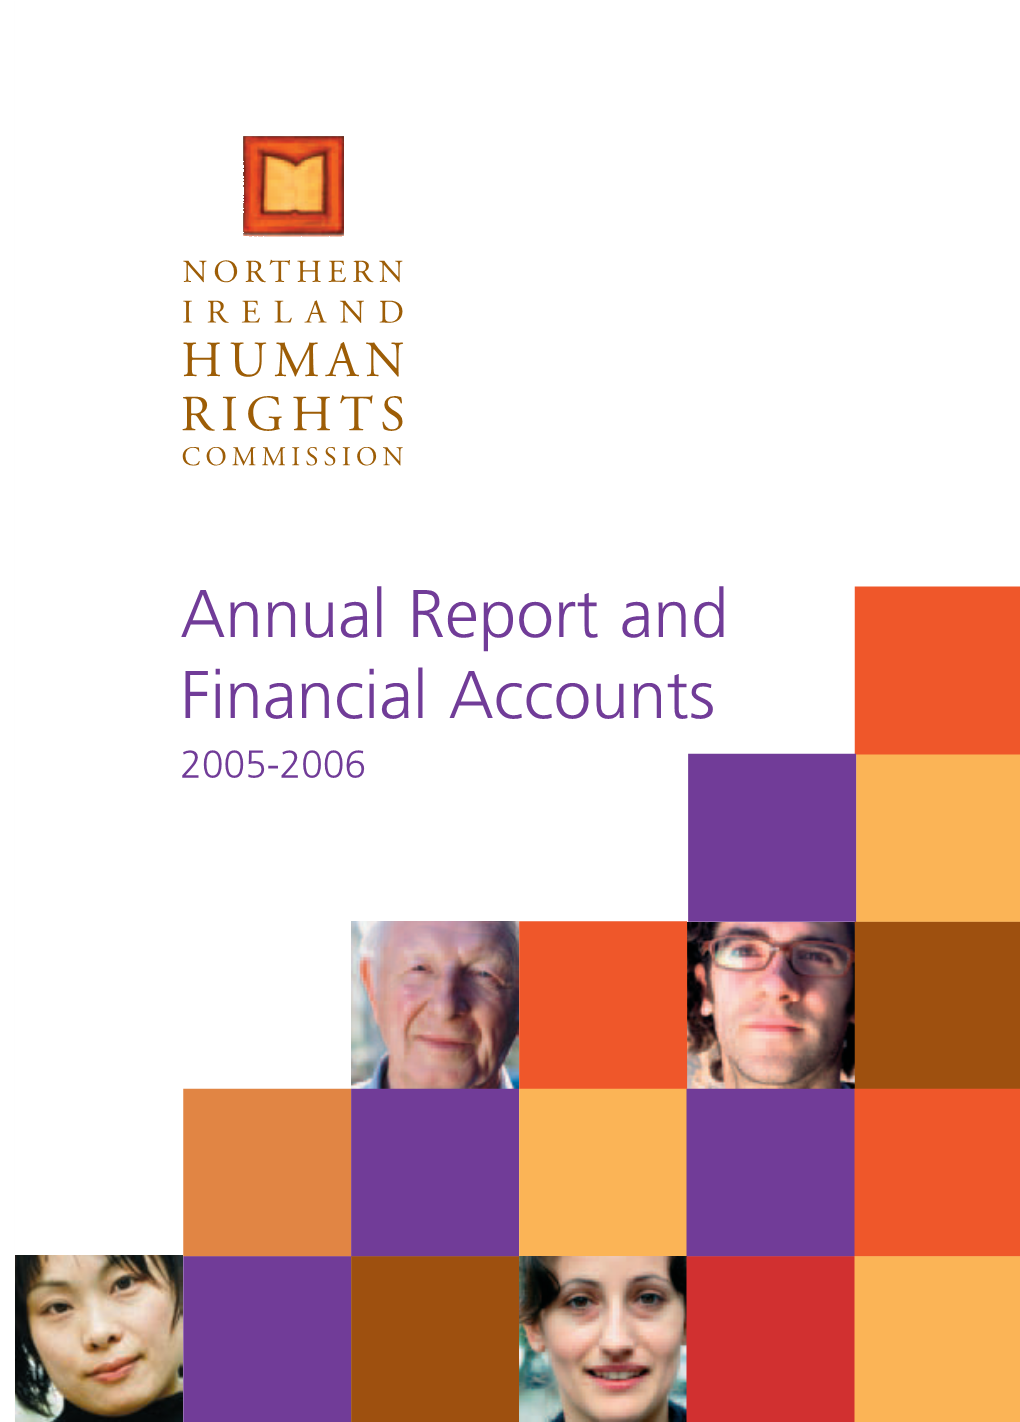 Annual Report and Financial Accounts 2005-2006